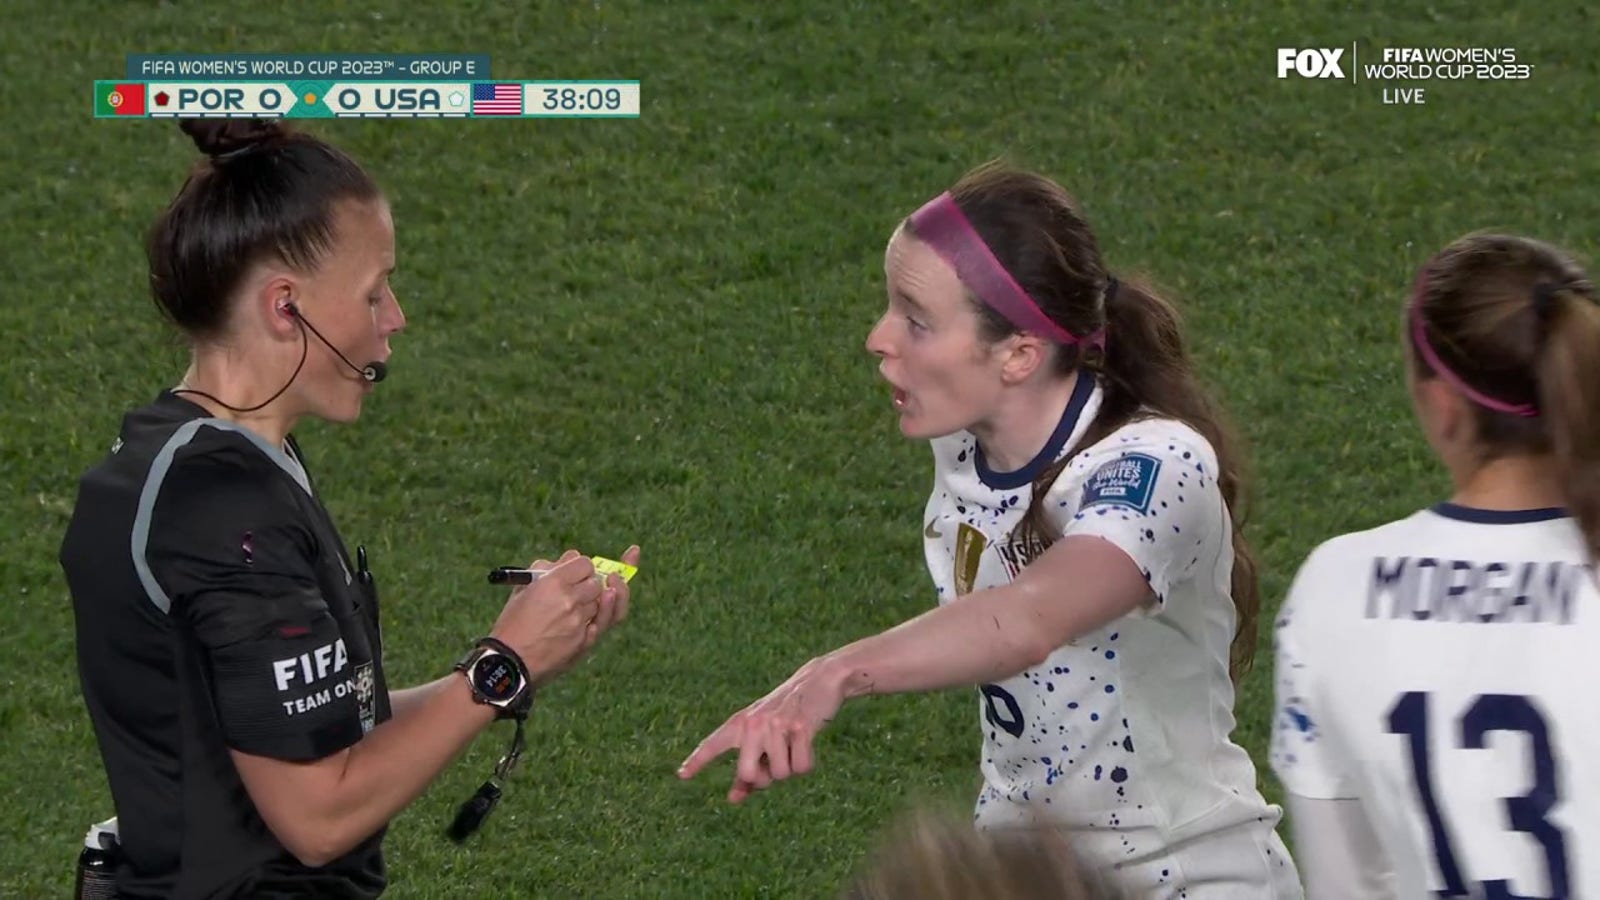 USWNT's Rose Lavelle receives a yellow card vs. Portugal